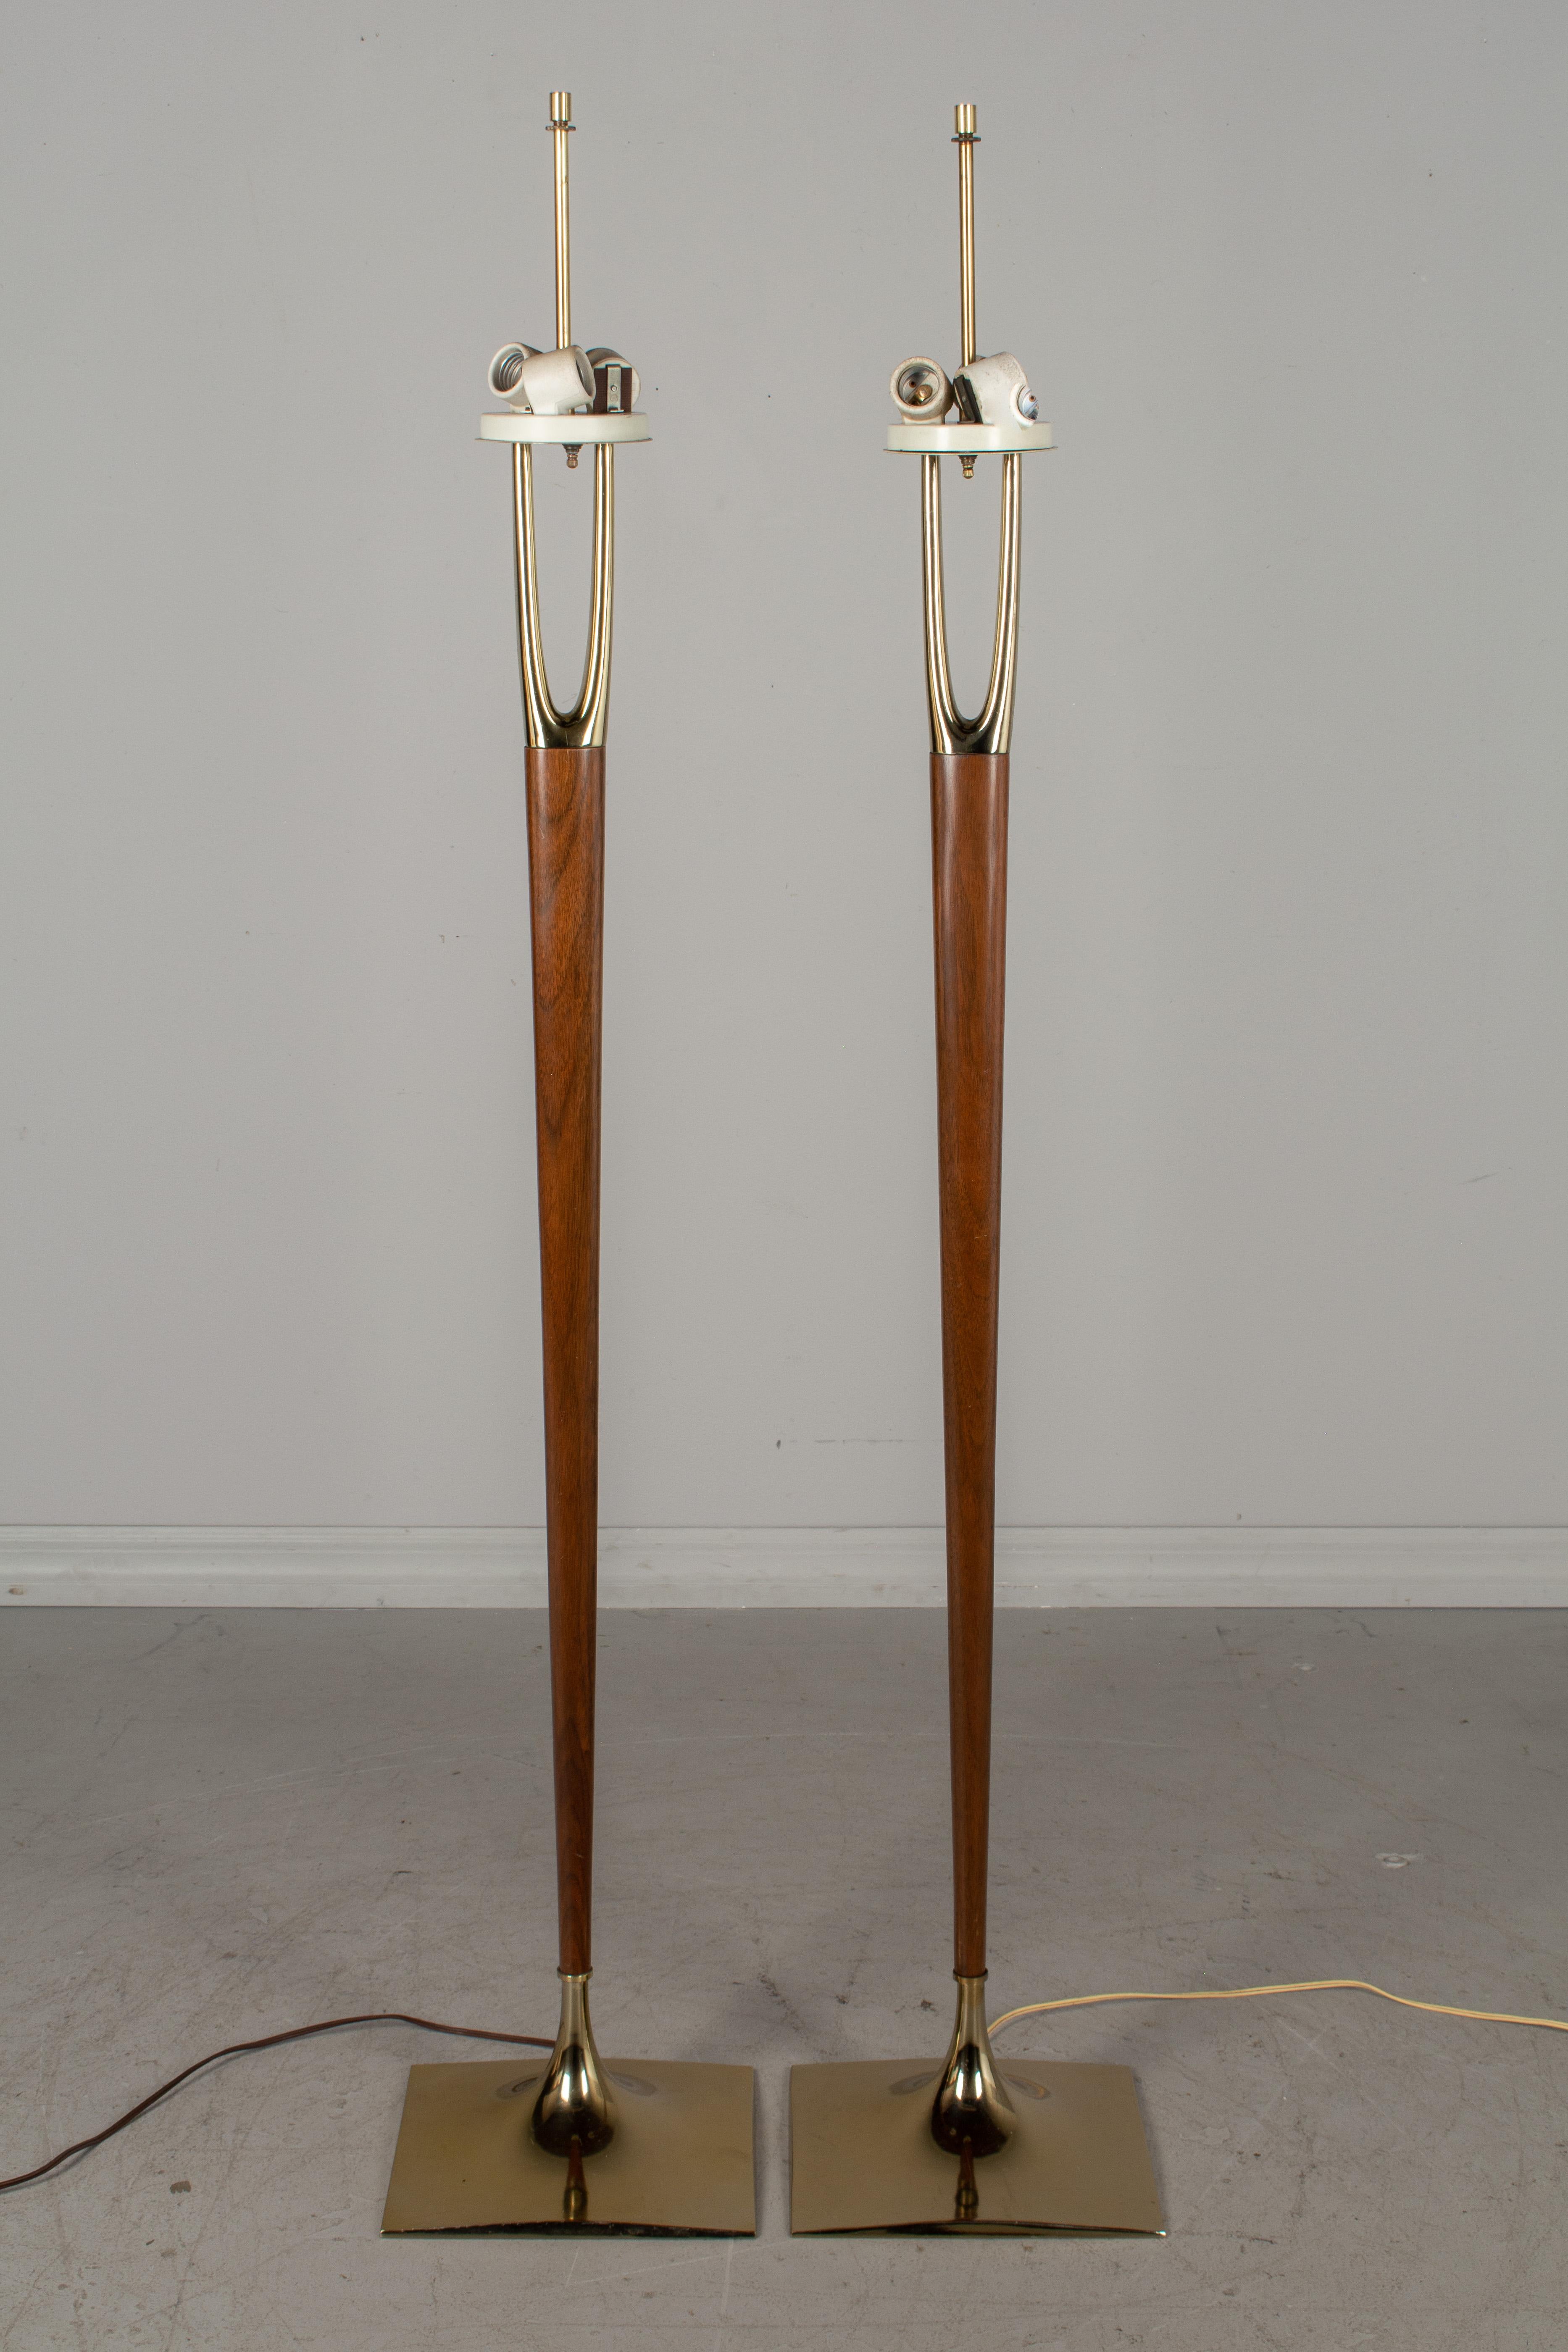 A rare pair of iconic, sought after Mid-Century Modern floor lamps designed by Gerald Thurston and made by the Laurel Lamp Company. Solid walnut center post with brass-plated wishbone shaped prong at top and a brass-plated base. Original three-way